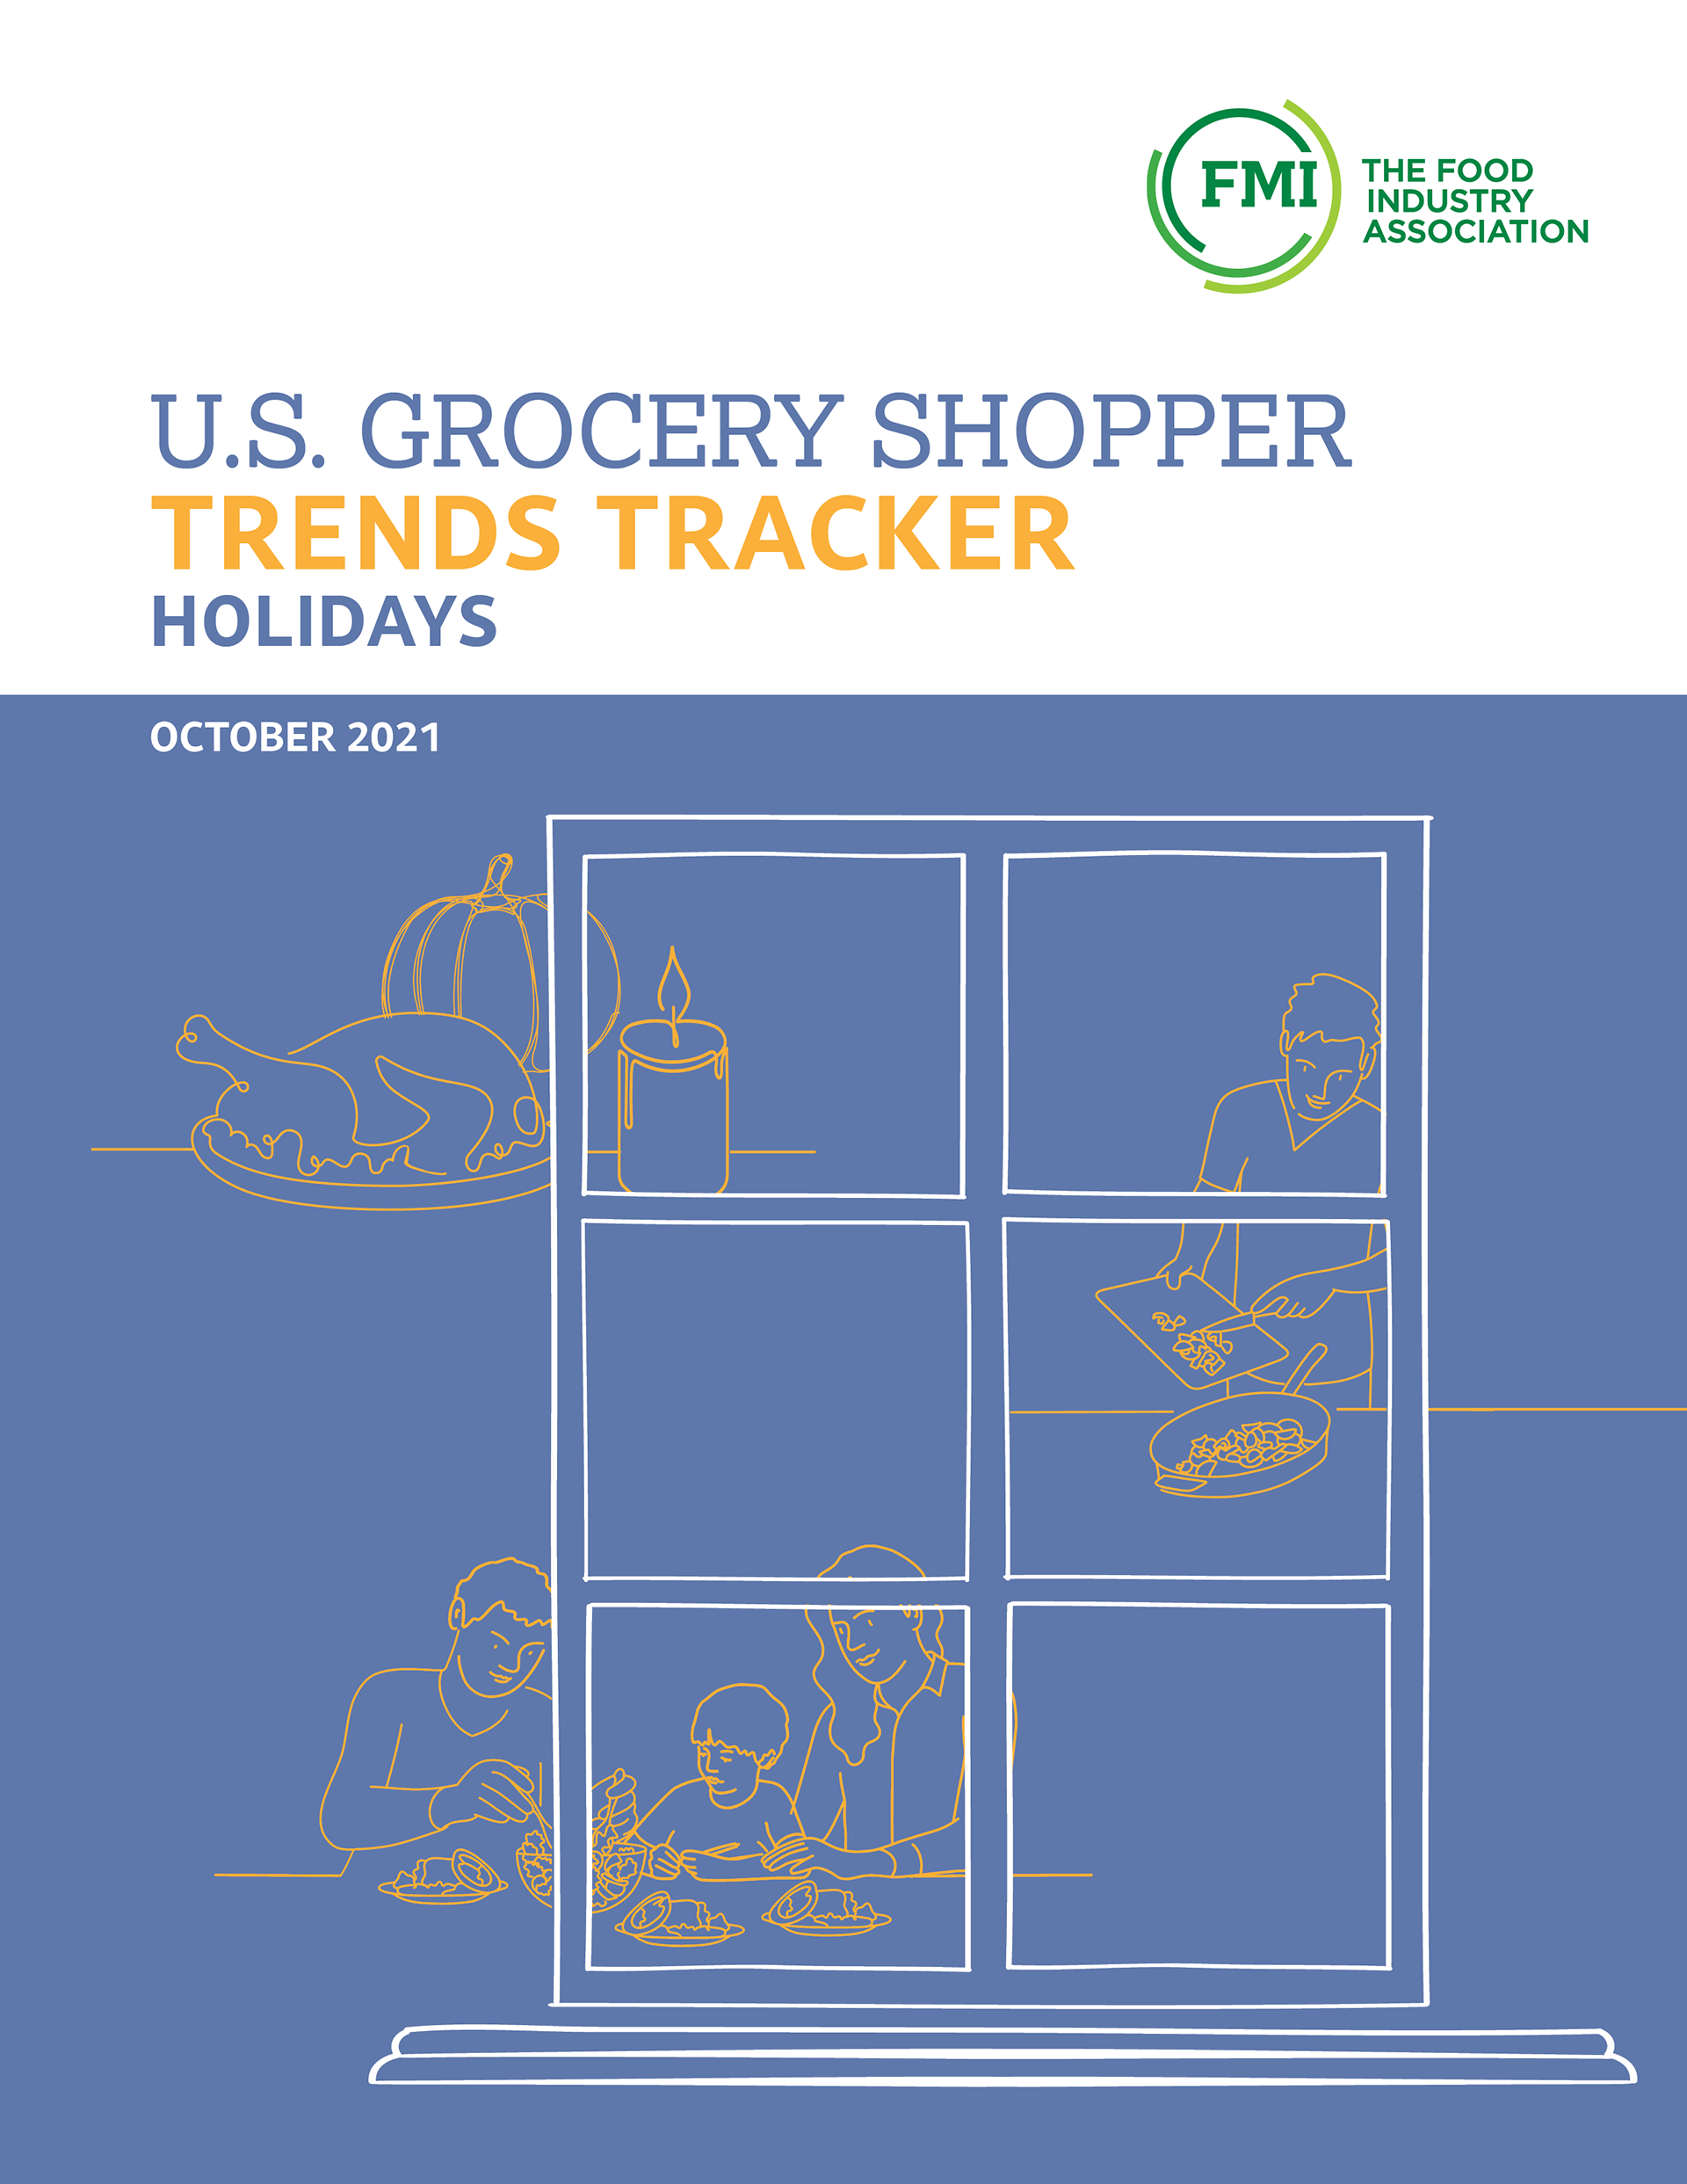 Trends Tracker 2021 Holiday Cover